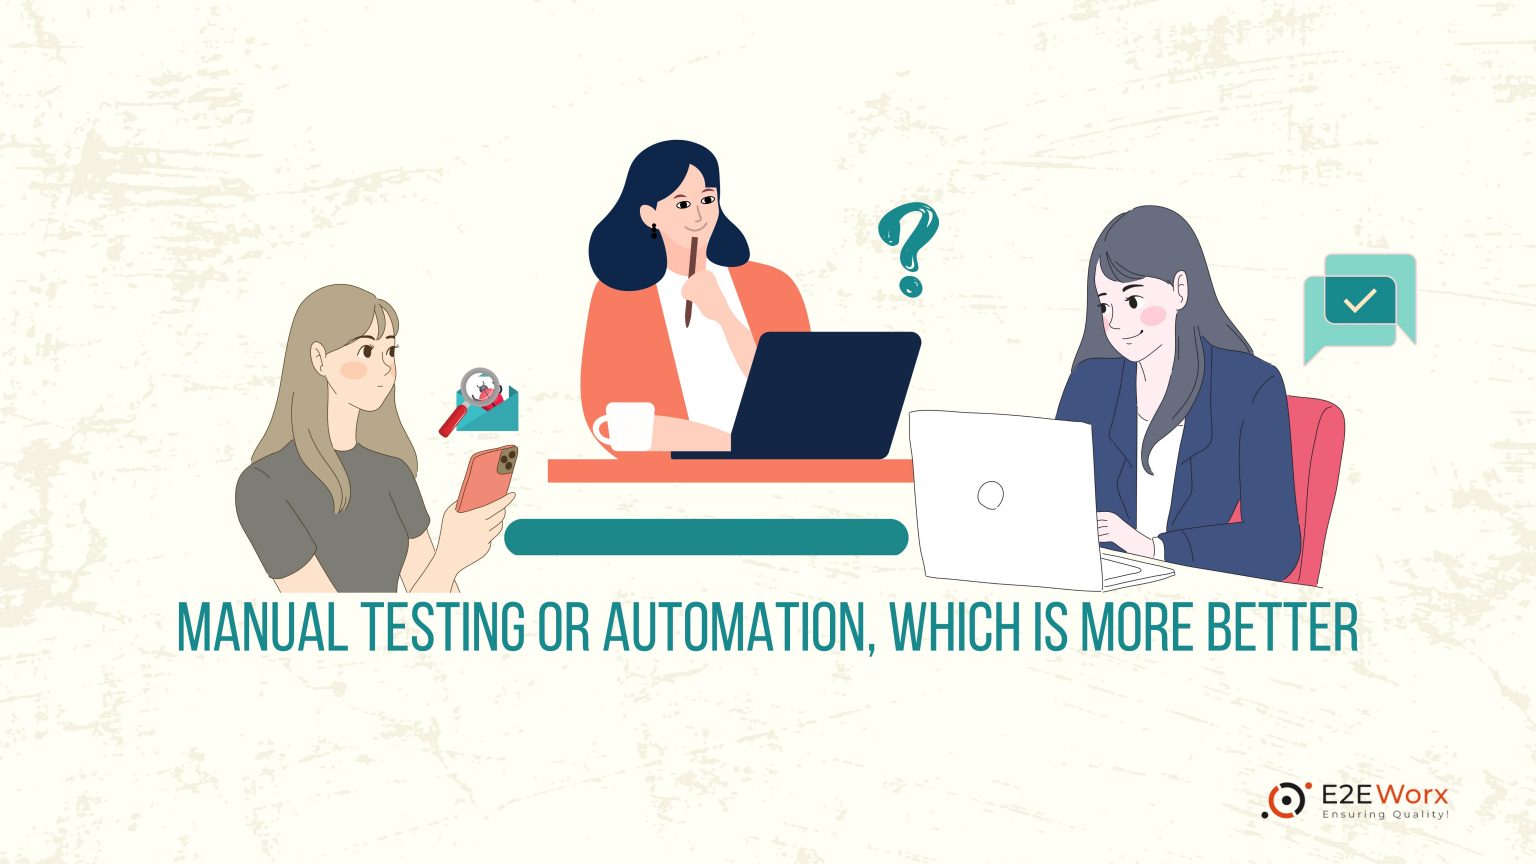 Software Quality Assurance Manual Testing Or Automation, Which is more better - E2EWOrx